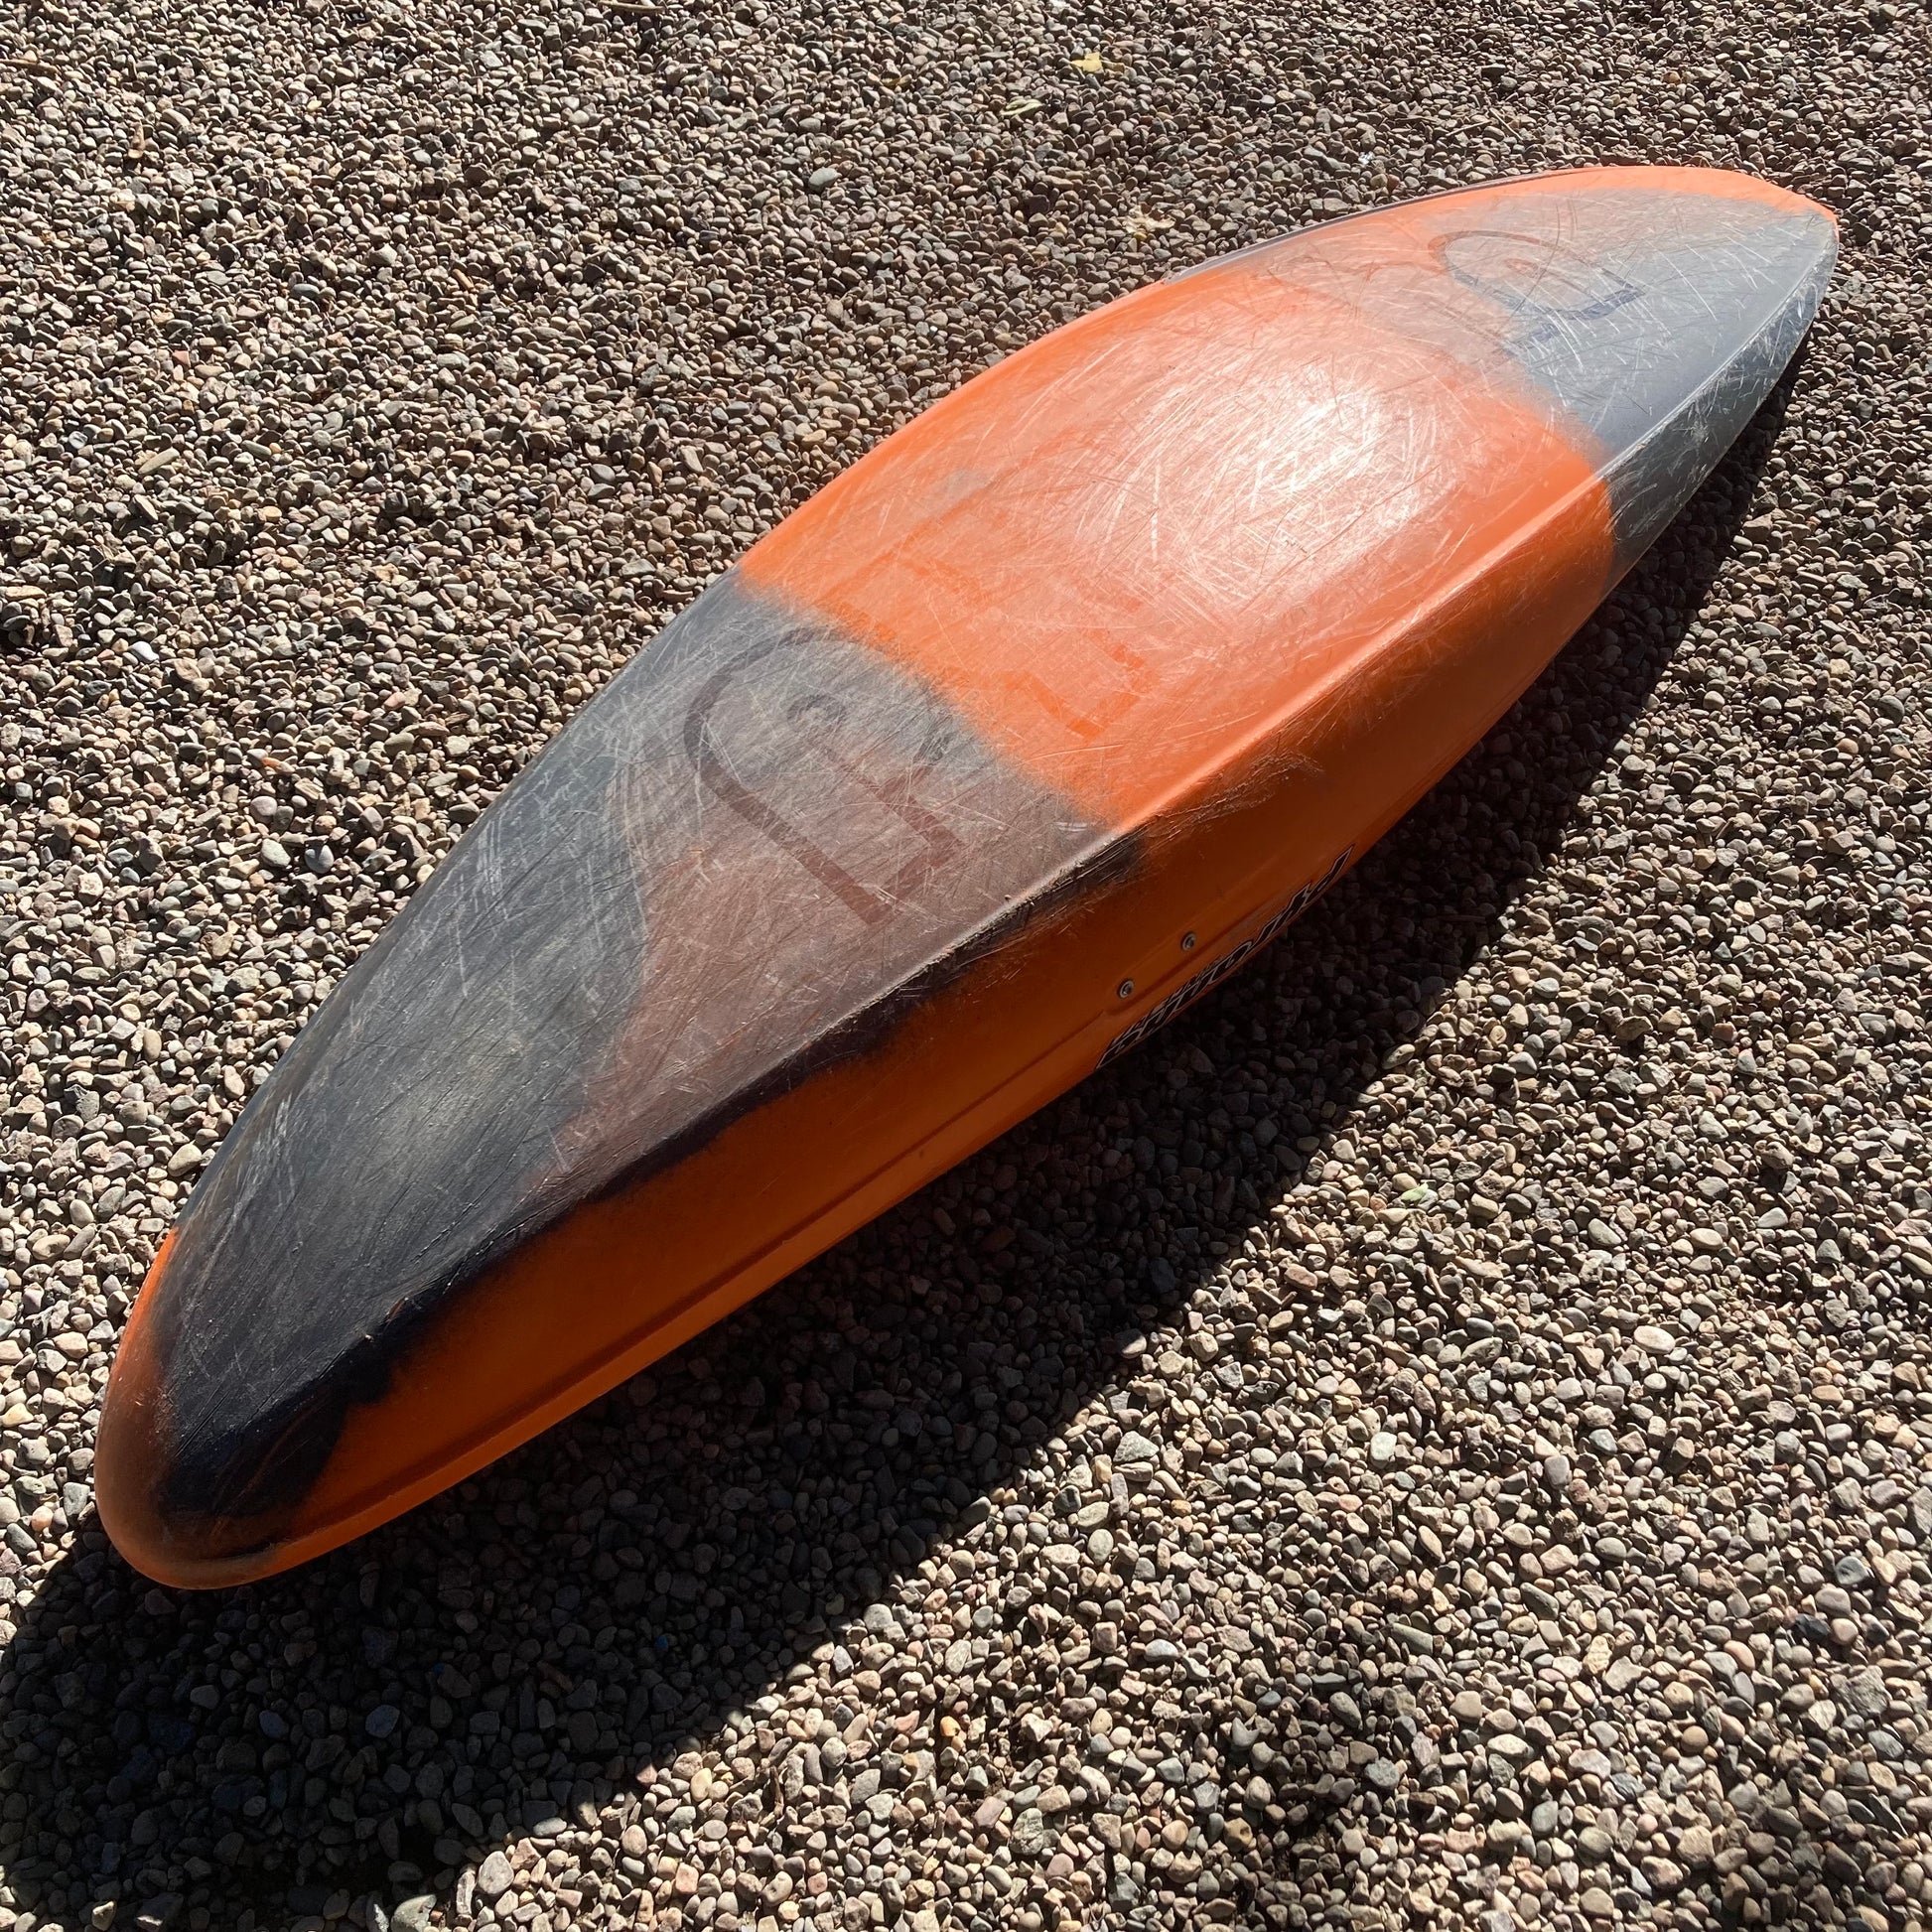 A Pyranha Demo Ripper 2.0 SM surfboard laying on the ground.